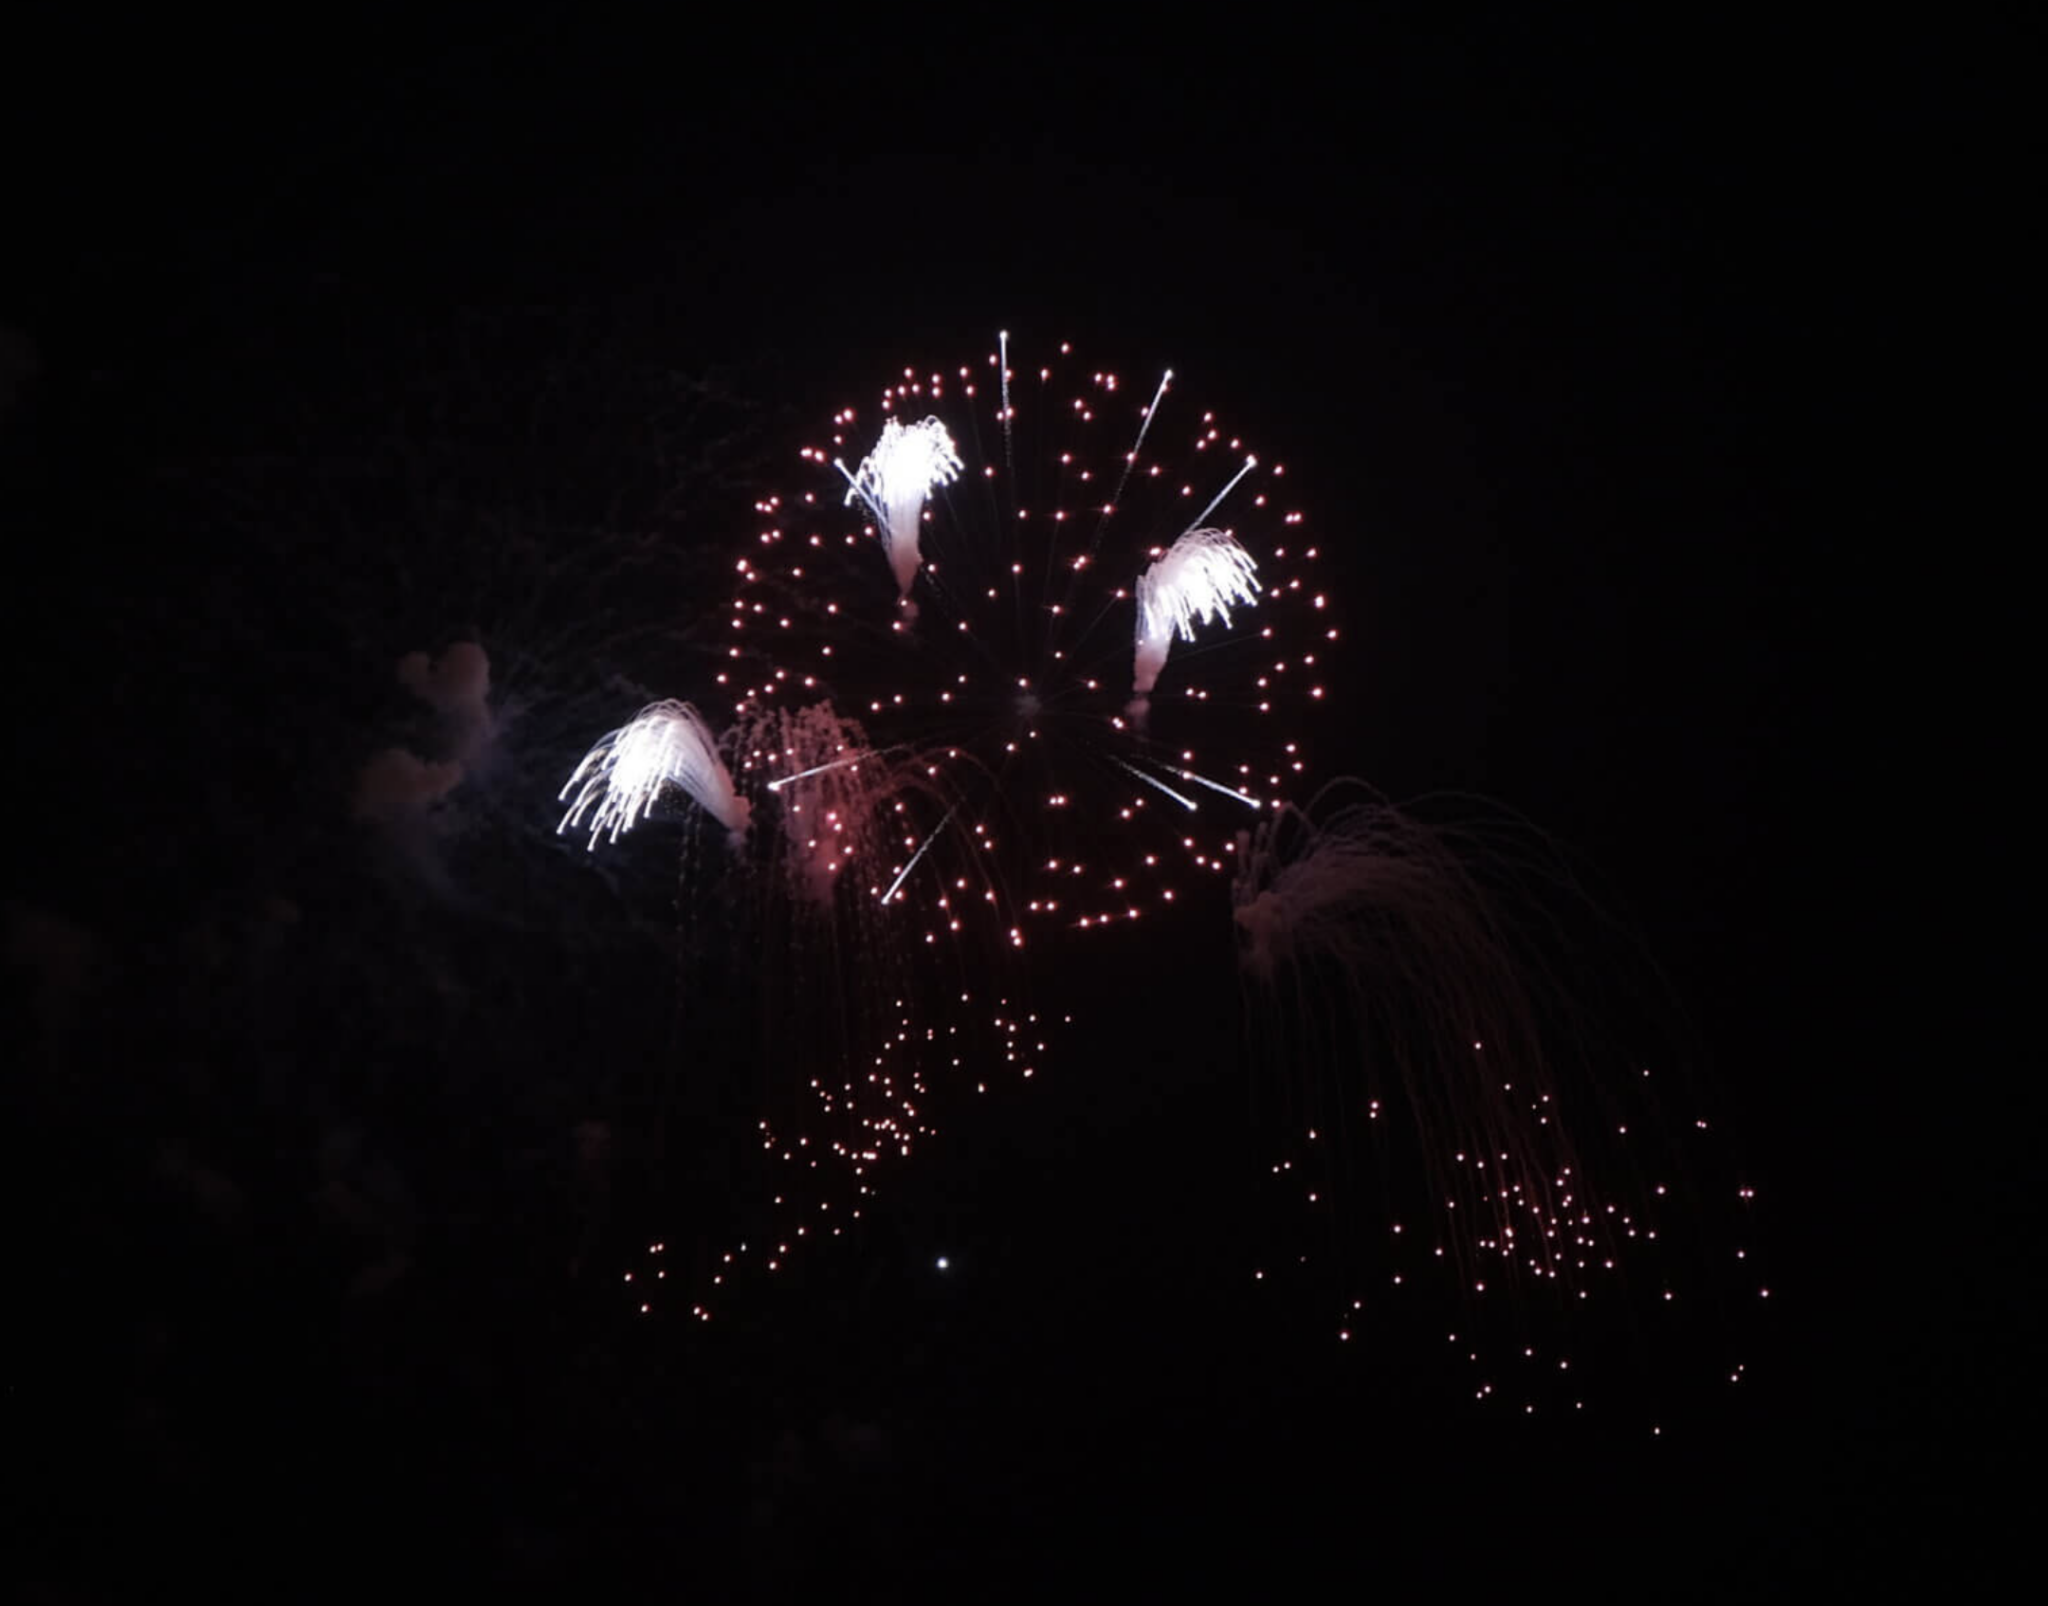 PHOTOS Orchard Beach sky lights up for early Fourth of July fireworks